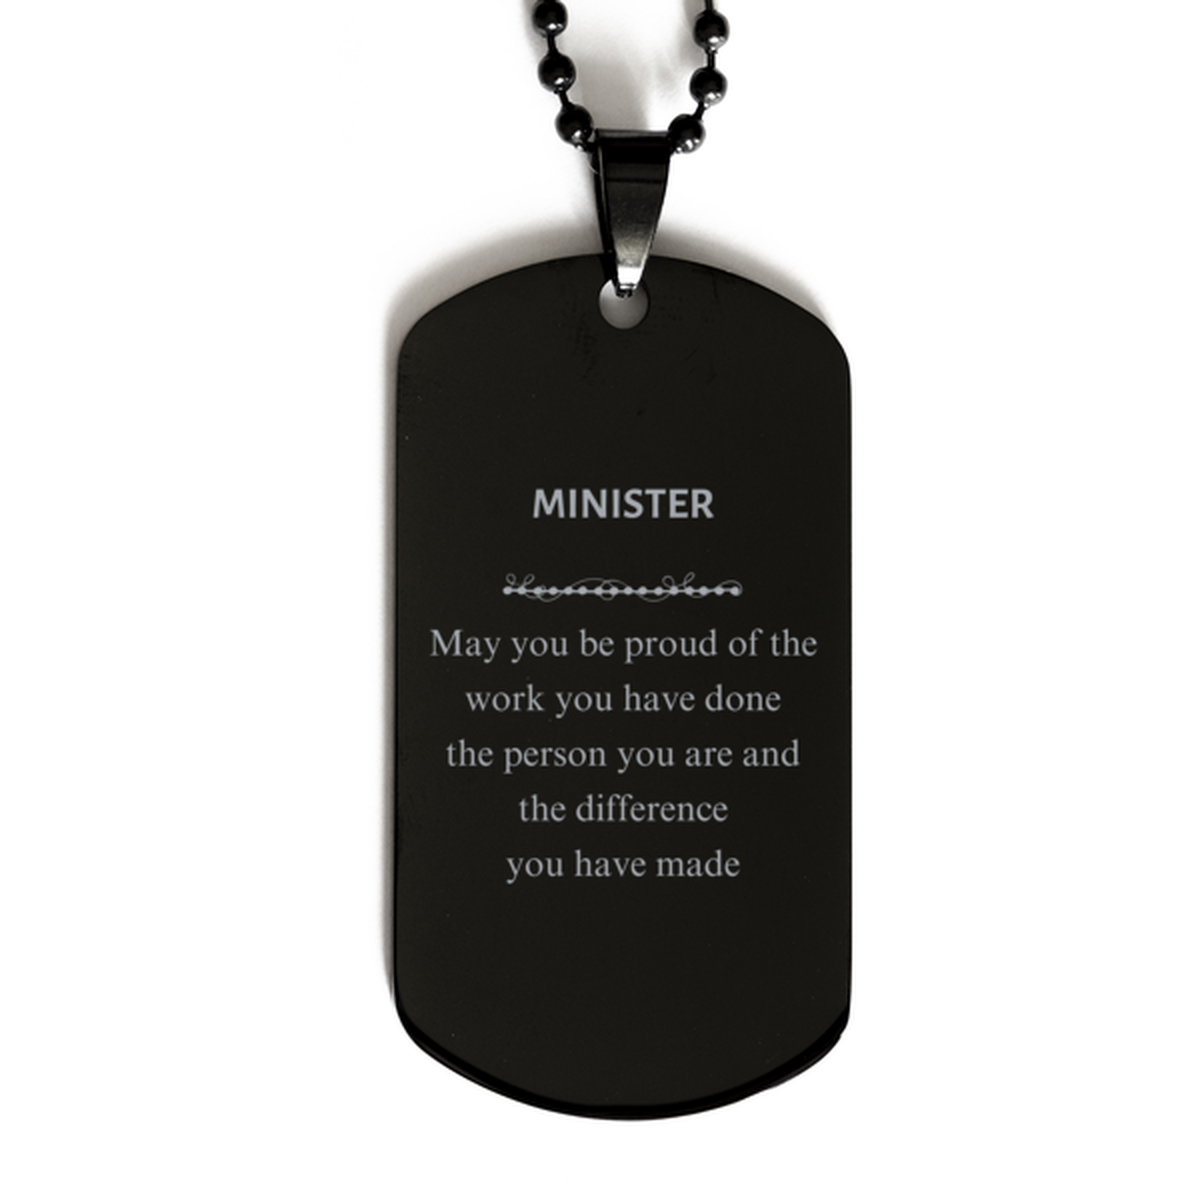 Minister May you be proud of the work you have done, Retirement Minister Black Dog Tag for Colleague Appreciation Gifts Amazing for Minister